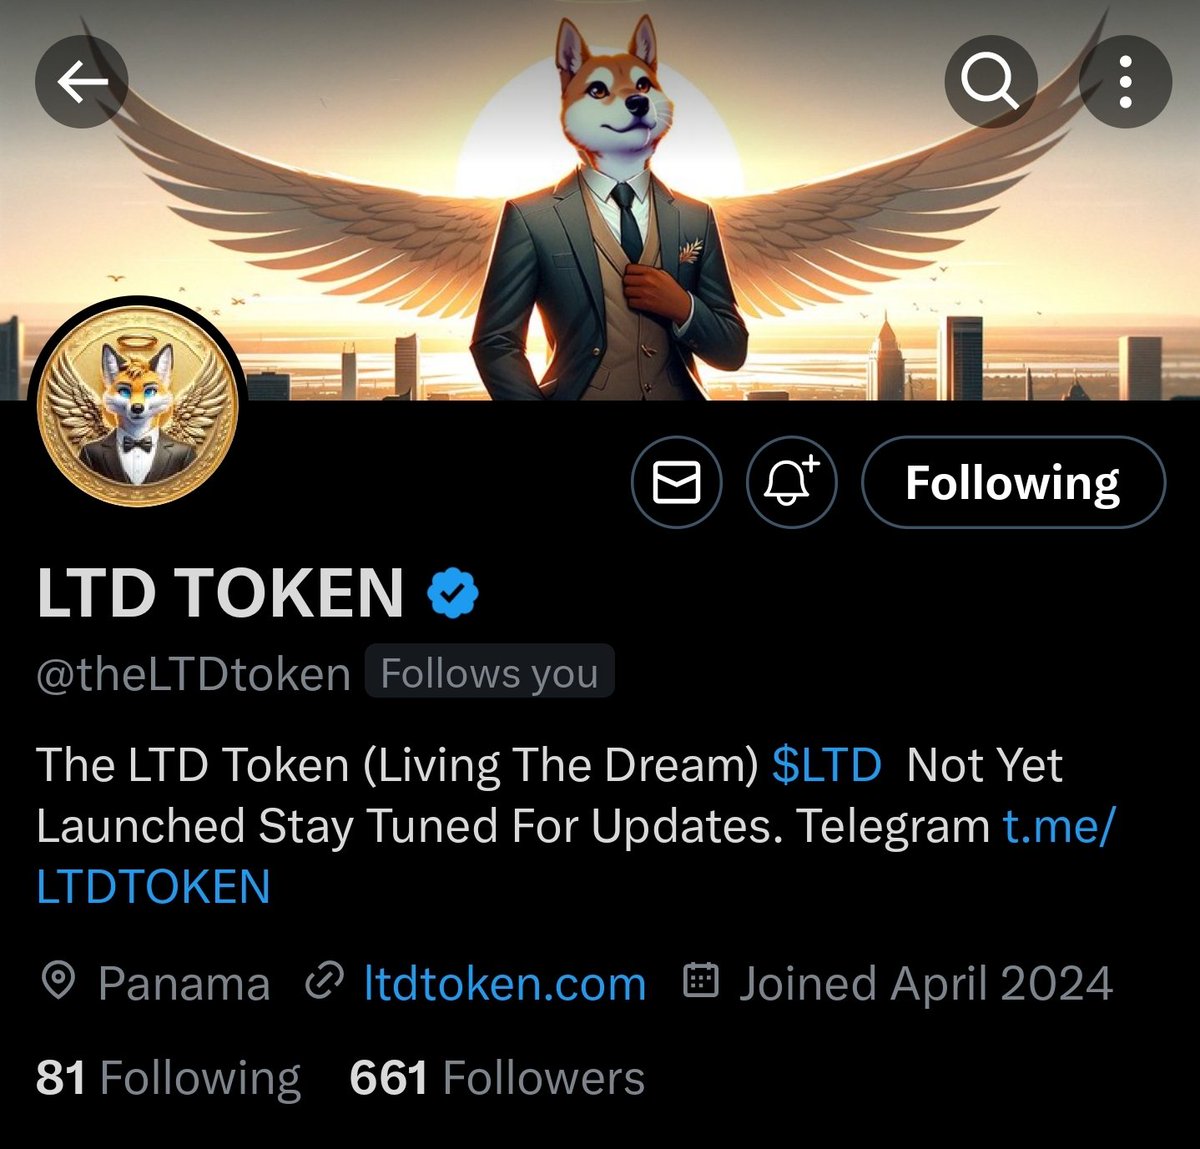 Booom 🔥 @theLTDtoken Is #LivingTheDream Only a few hours later and we past 600 followers -almost 700- Dont miss out on the $LTD presale on Ethereum